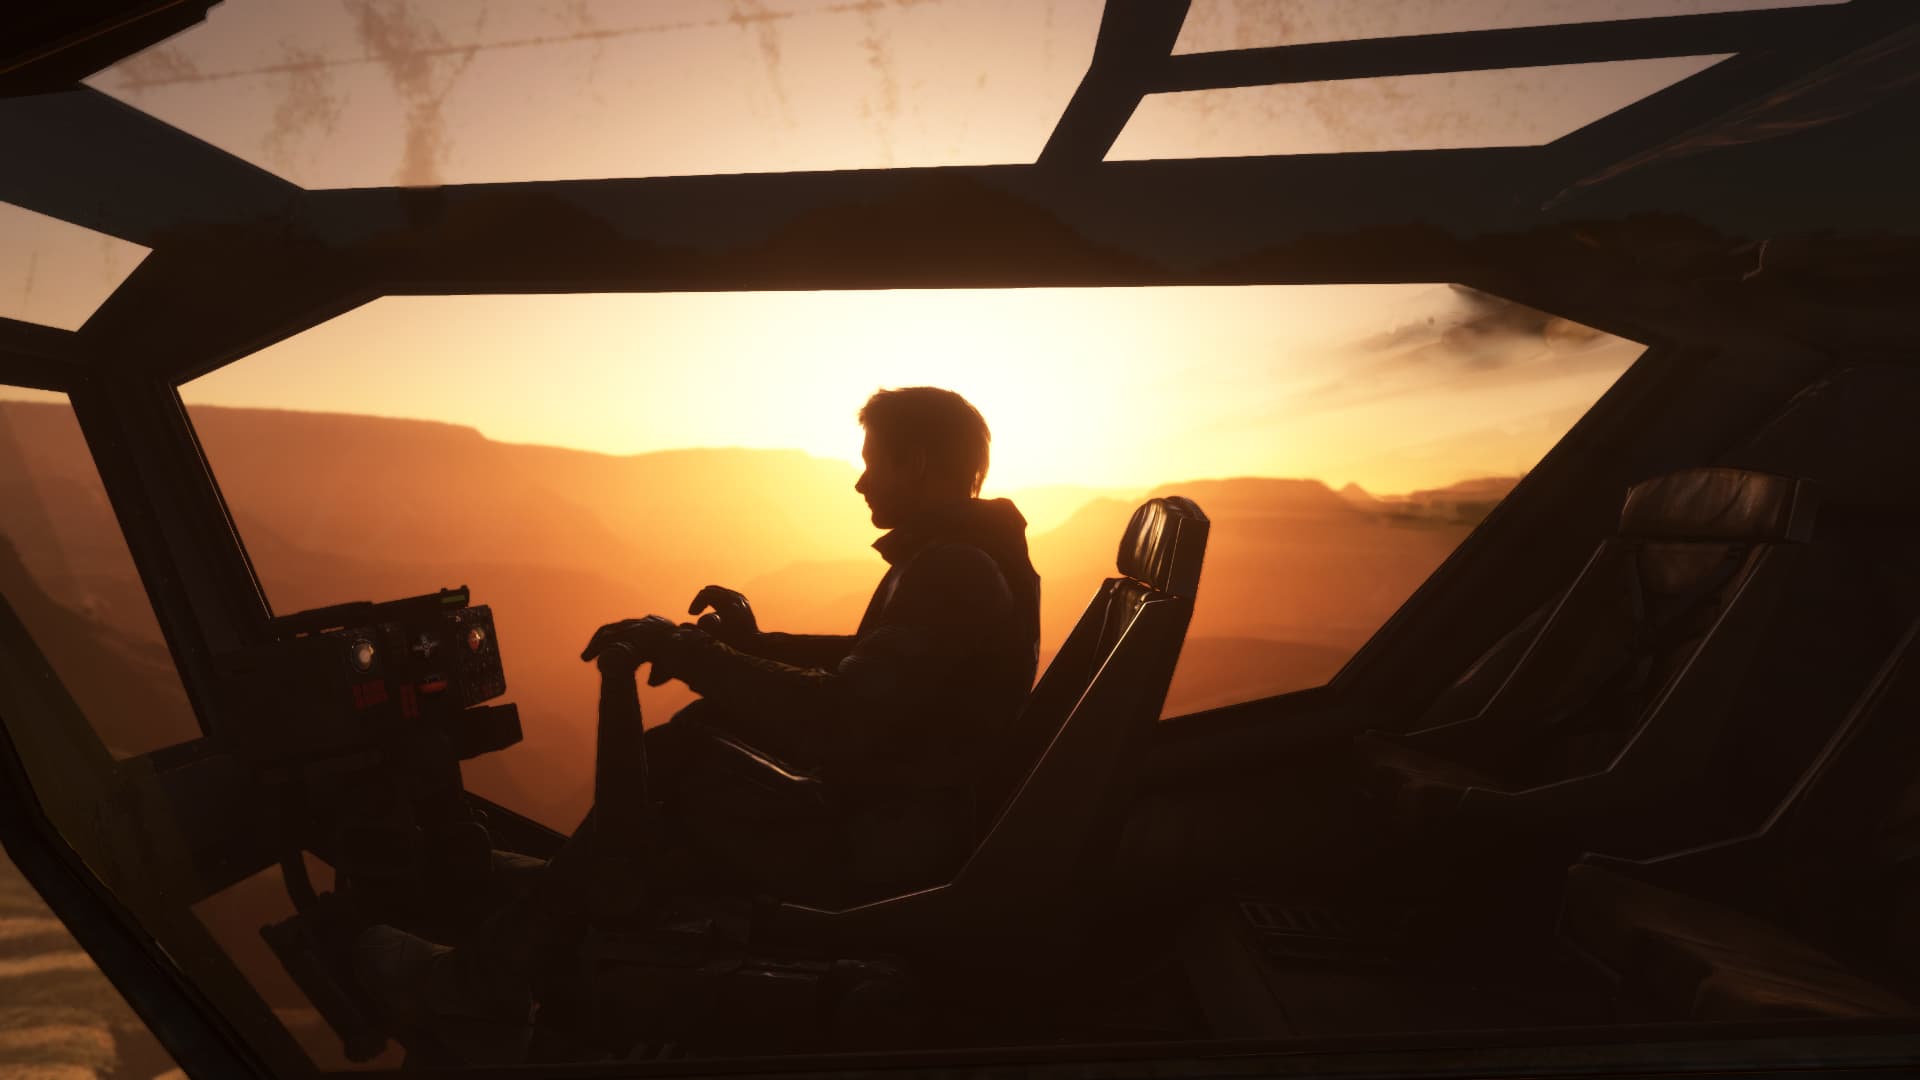 The pilot of the Ornithopter with hands on the controls as the sun sets over the horizon on their right.